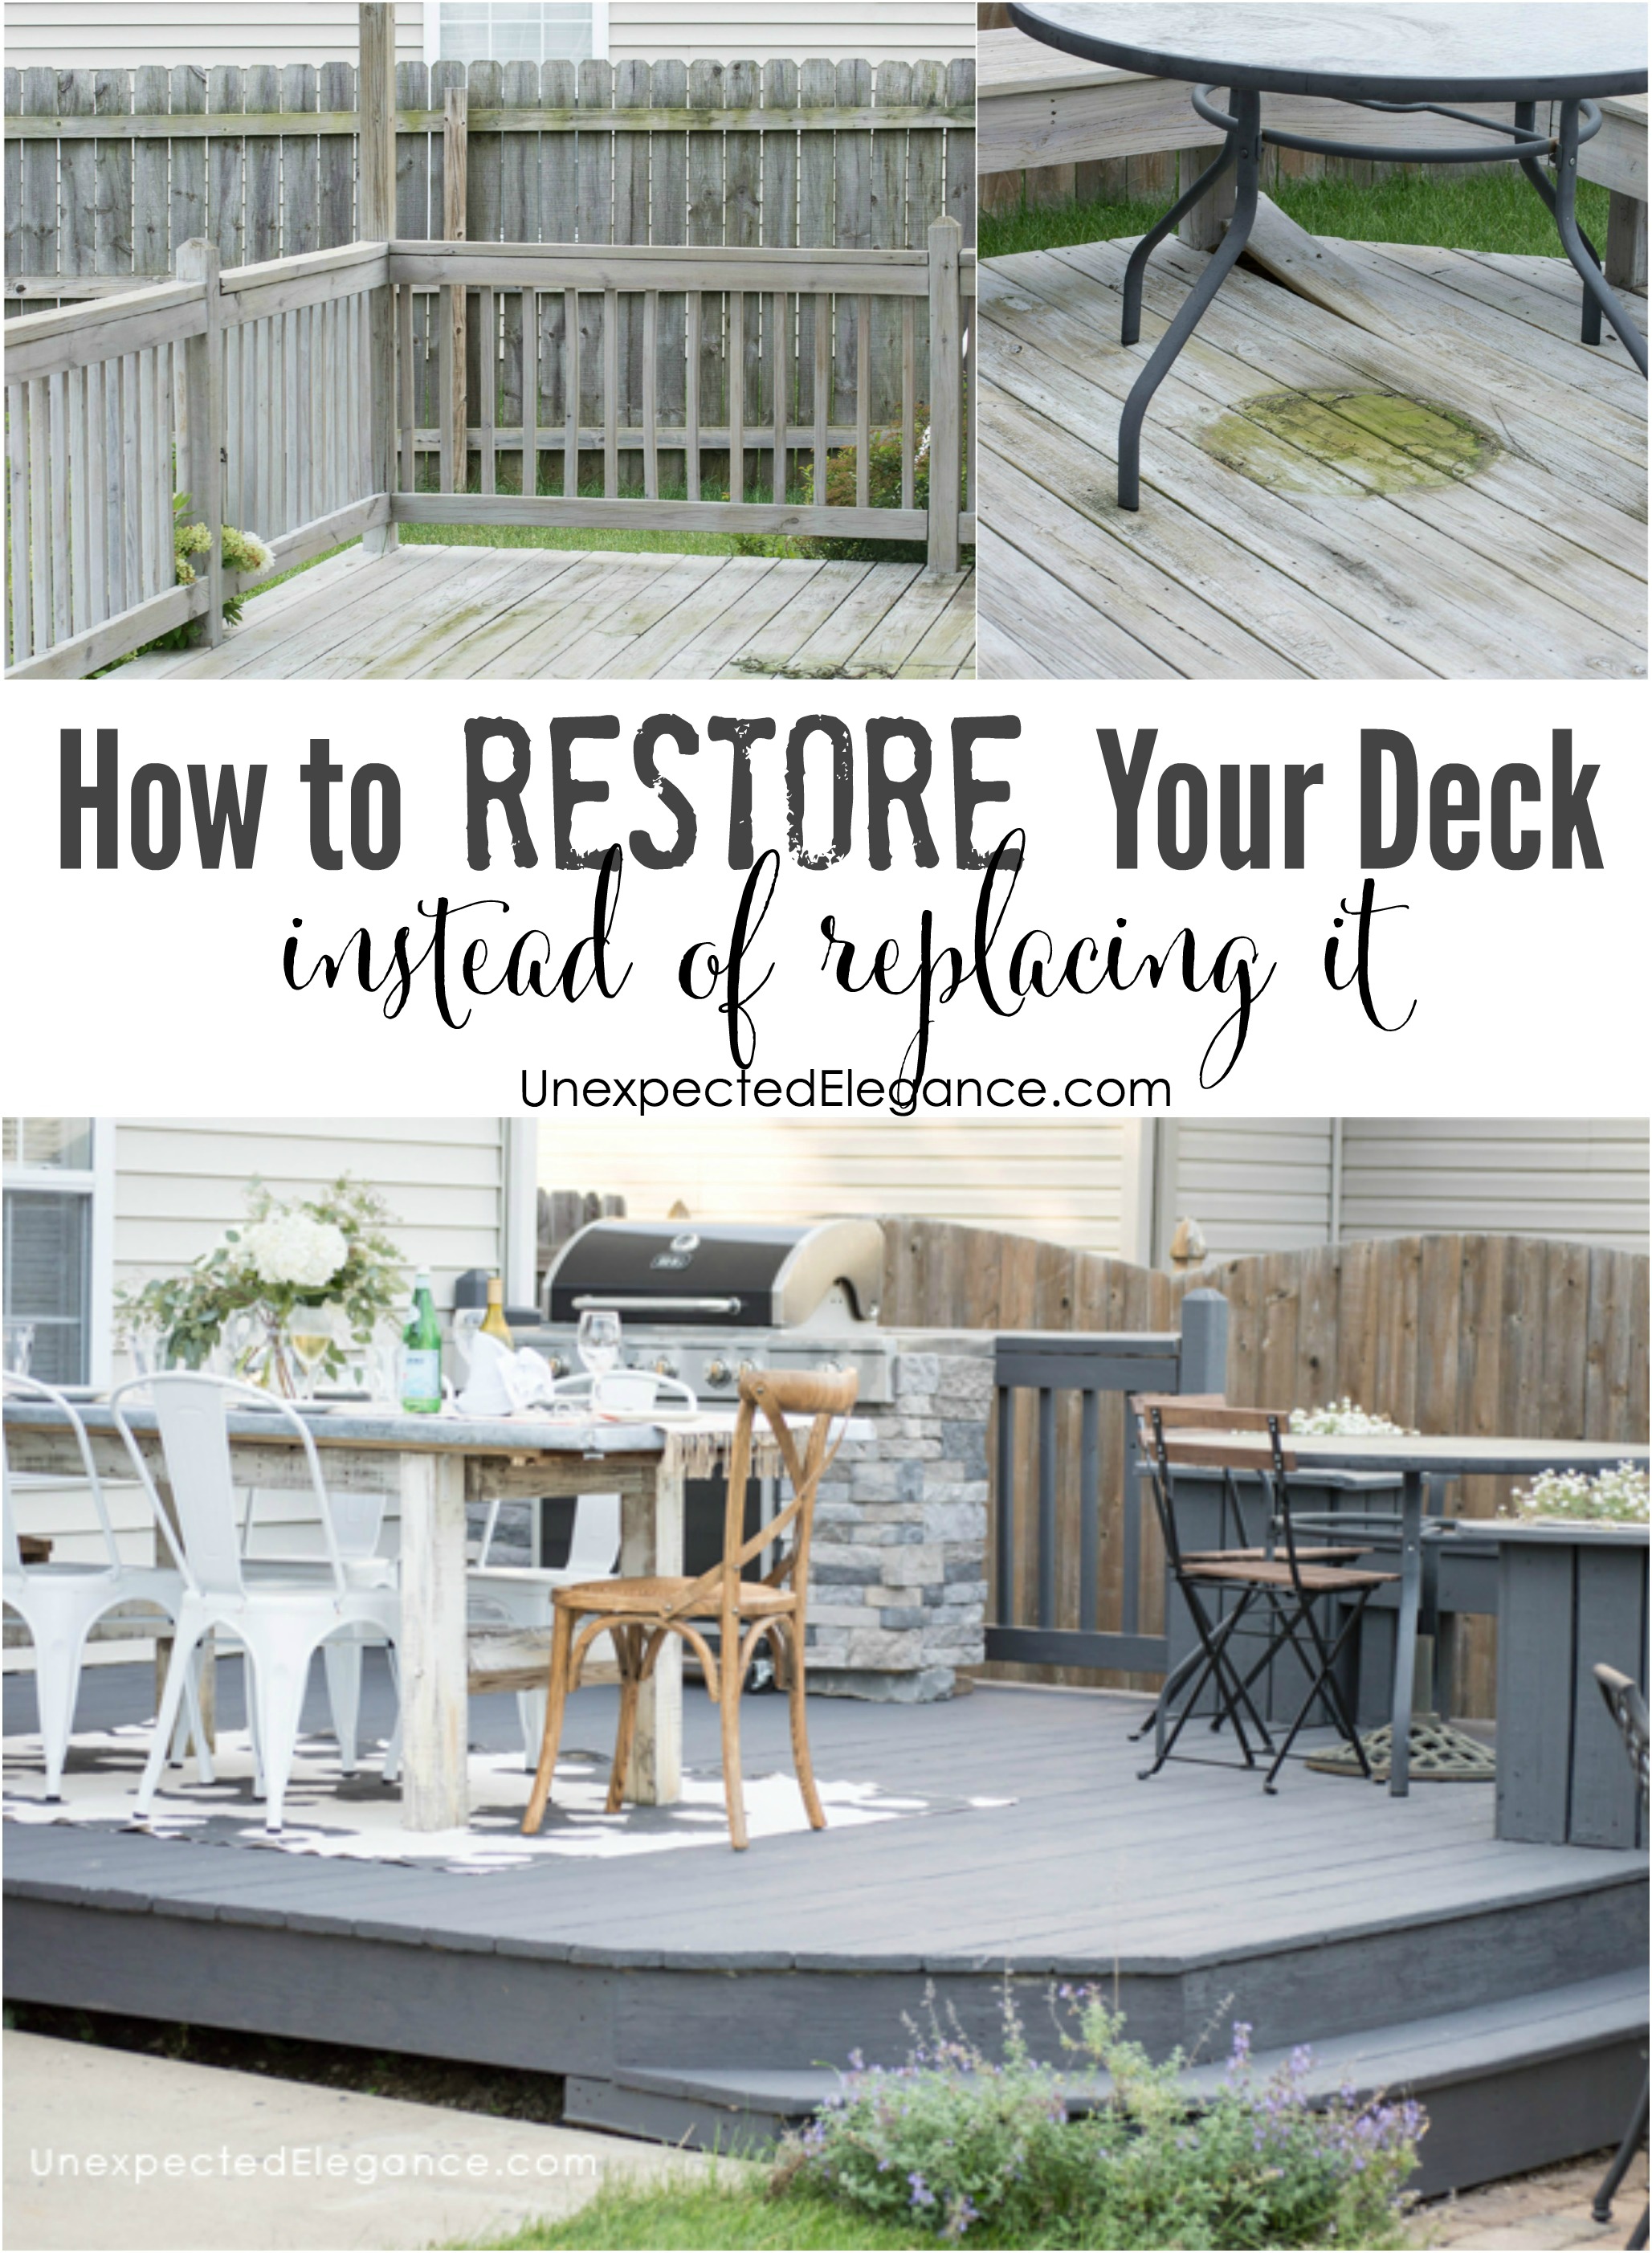 If your deck has seen better days, there may be another solution besides replacing the entire thing! Check out how to restore your deck, instead of replacing it!.